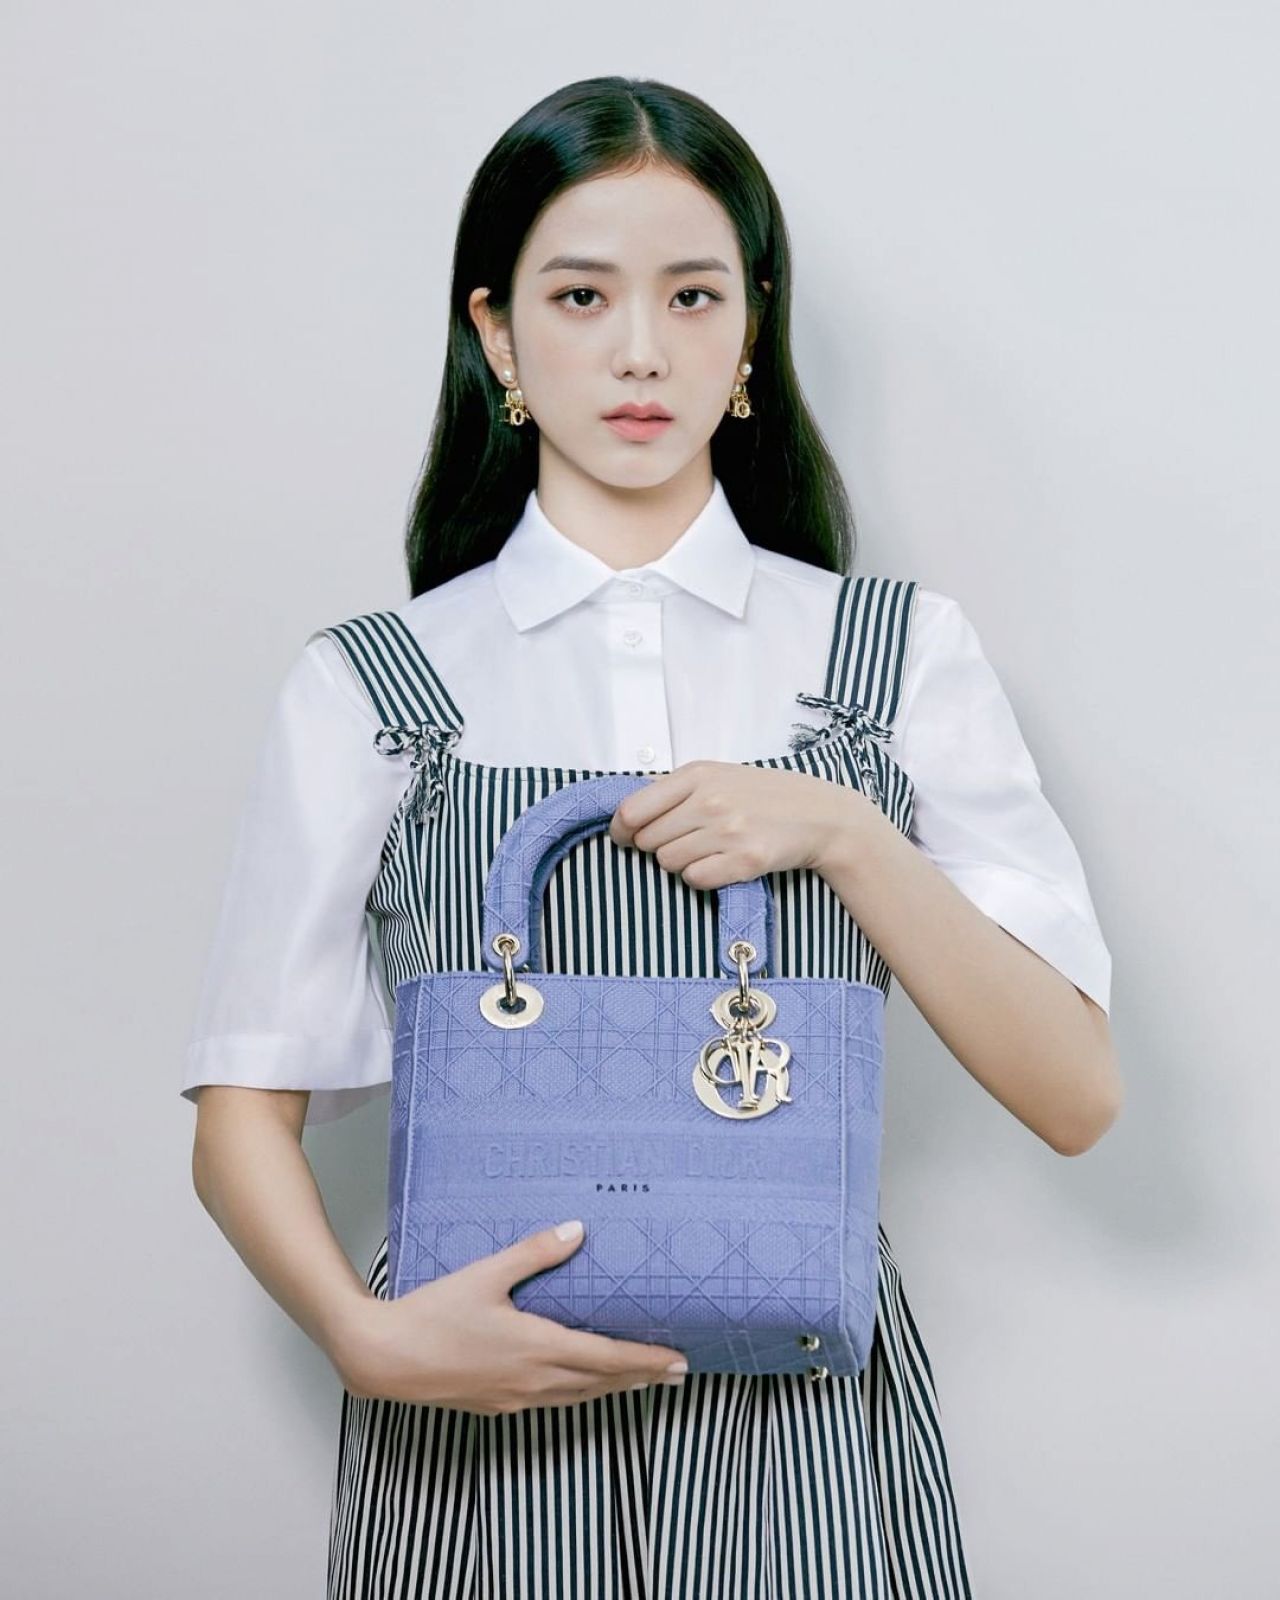 Blackpink's Jisoo for Dior Lady 95.22: See the Bag Campaign